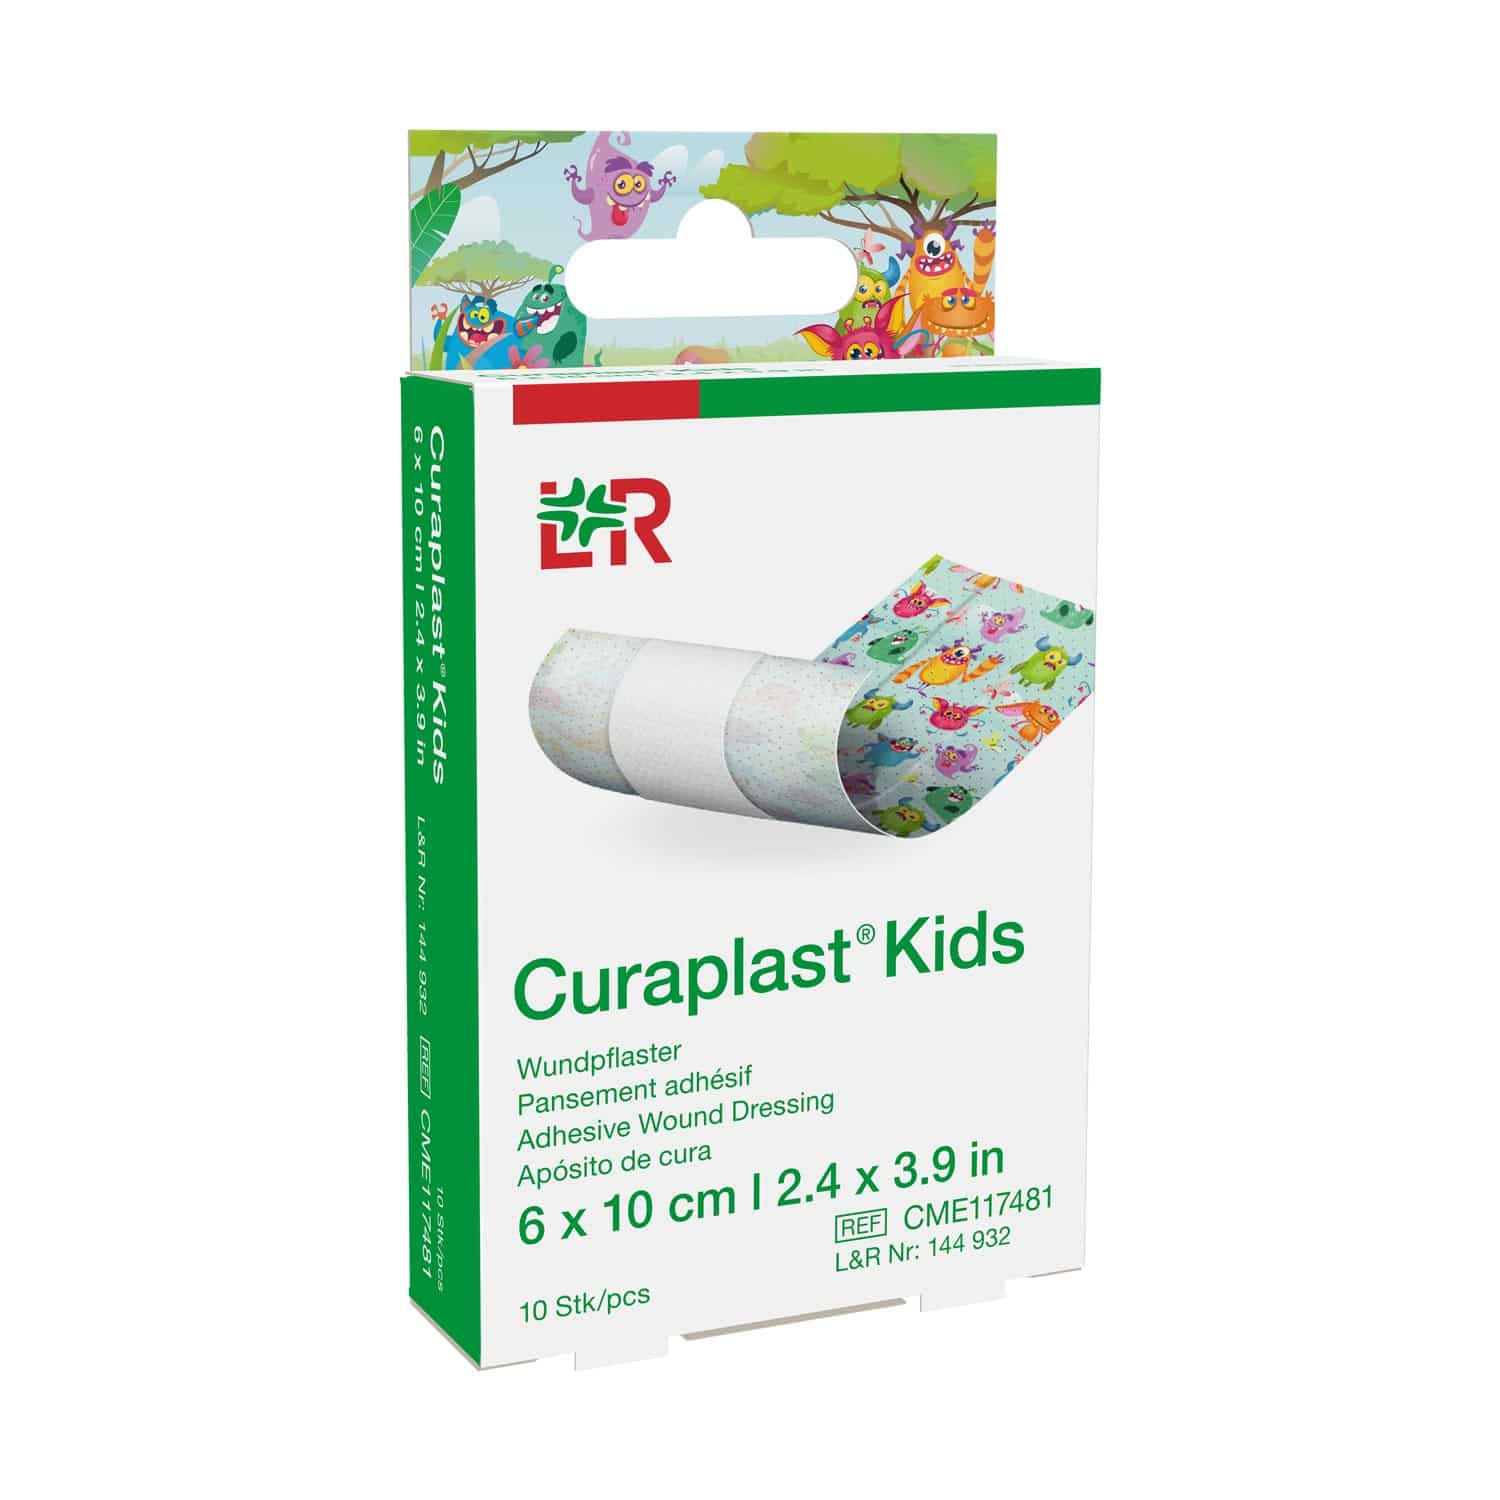 Curaplast Kids Adhesive Wound Dressing For Treating Small Wounds